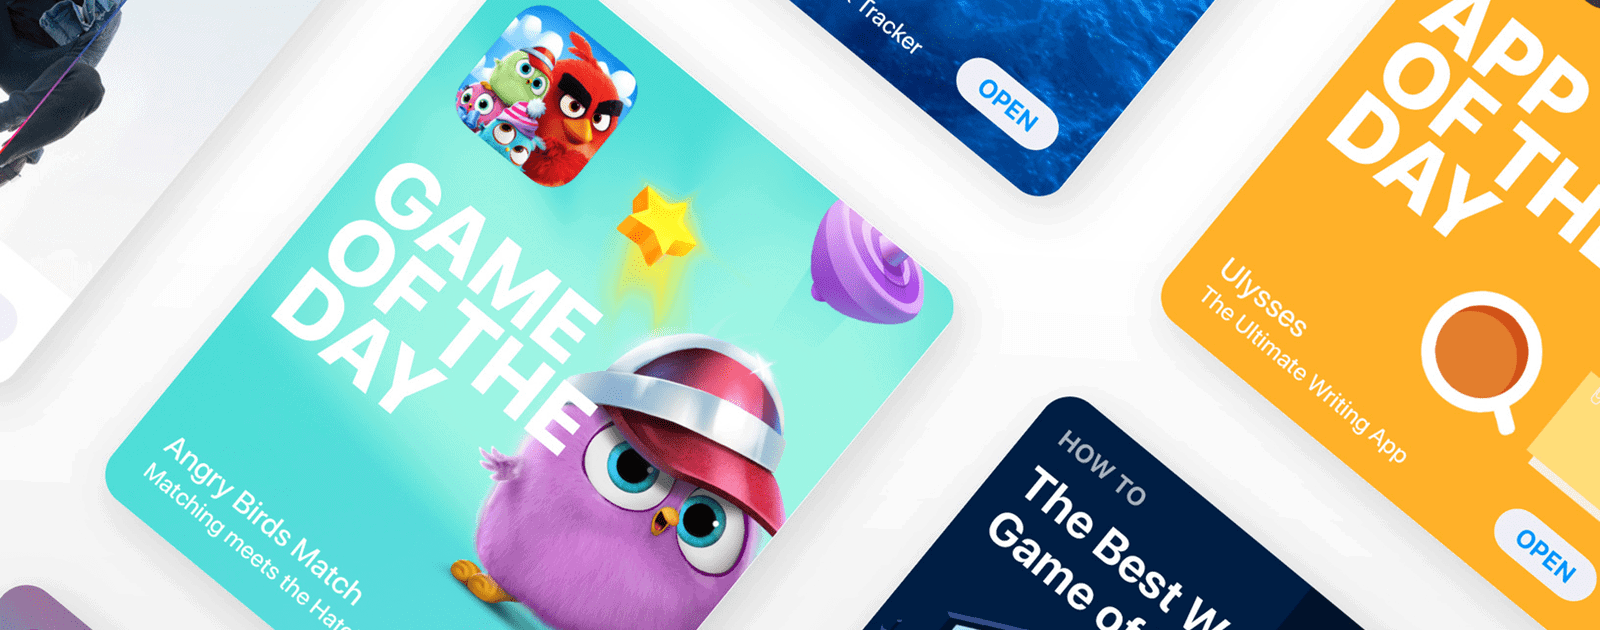 App Store 2017 Sales Set New Year’s Day Record of 0 Million